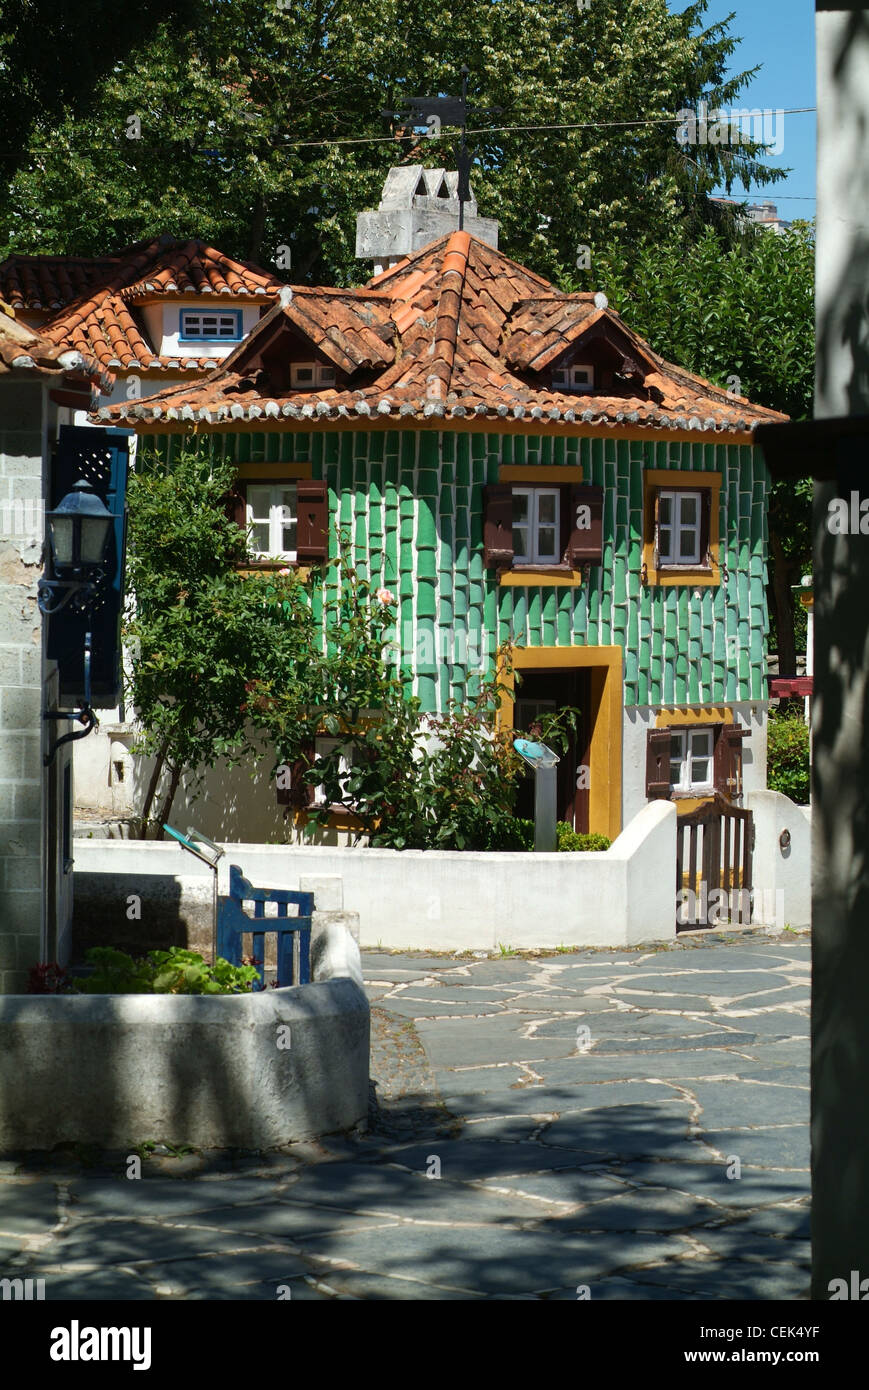 Miniature houses in Portugal dos Pequenitos theme park in Coimbra, Portugal Stock Photo